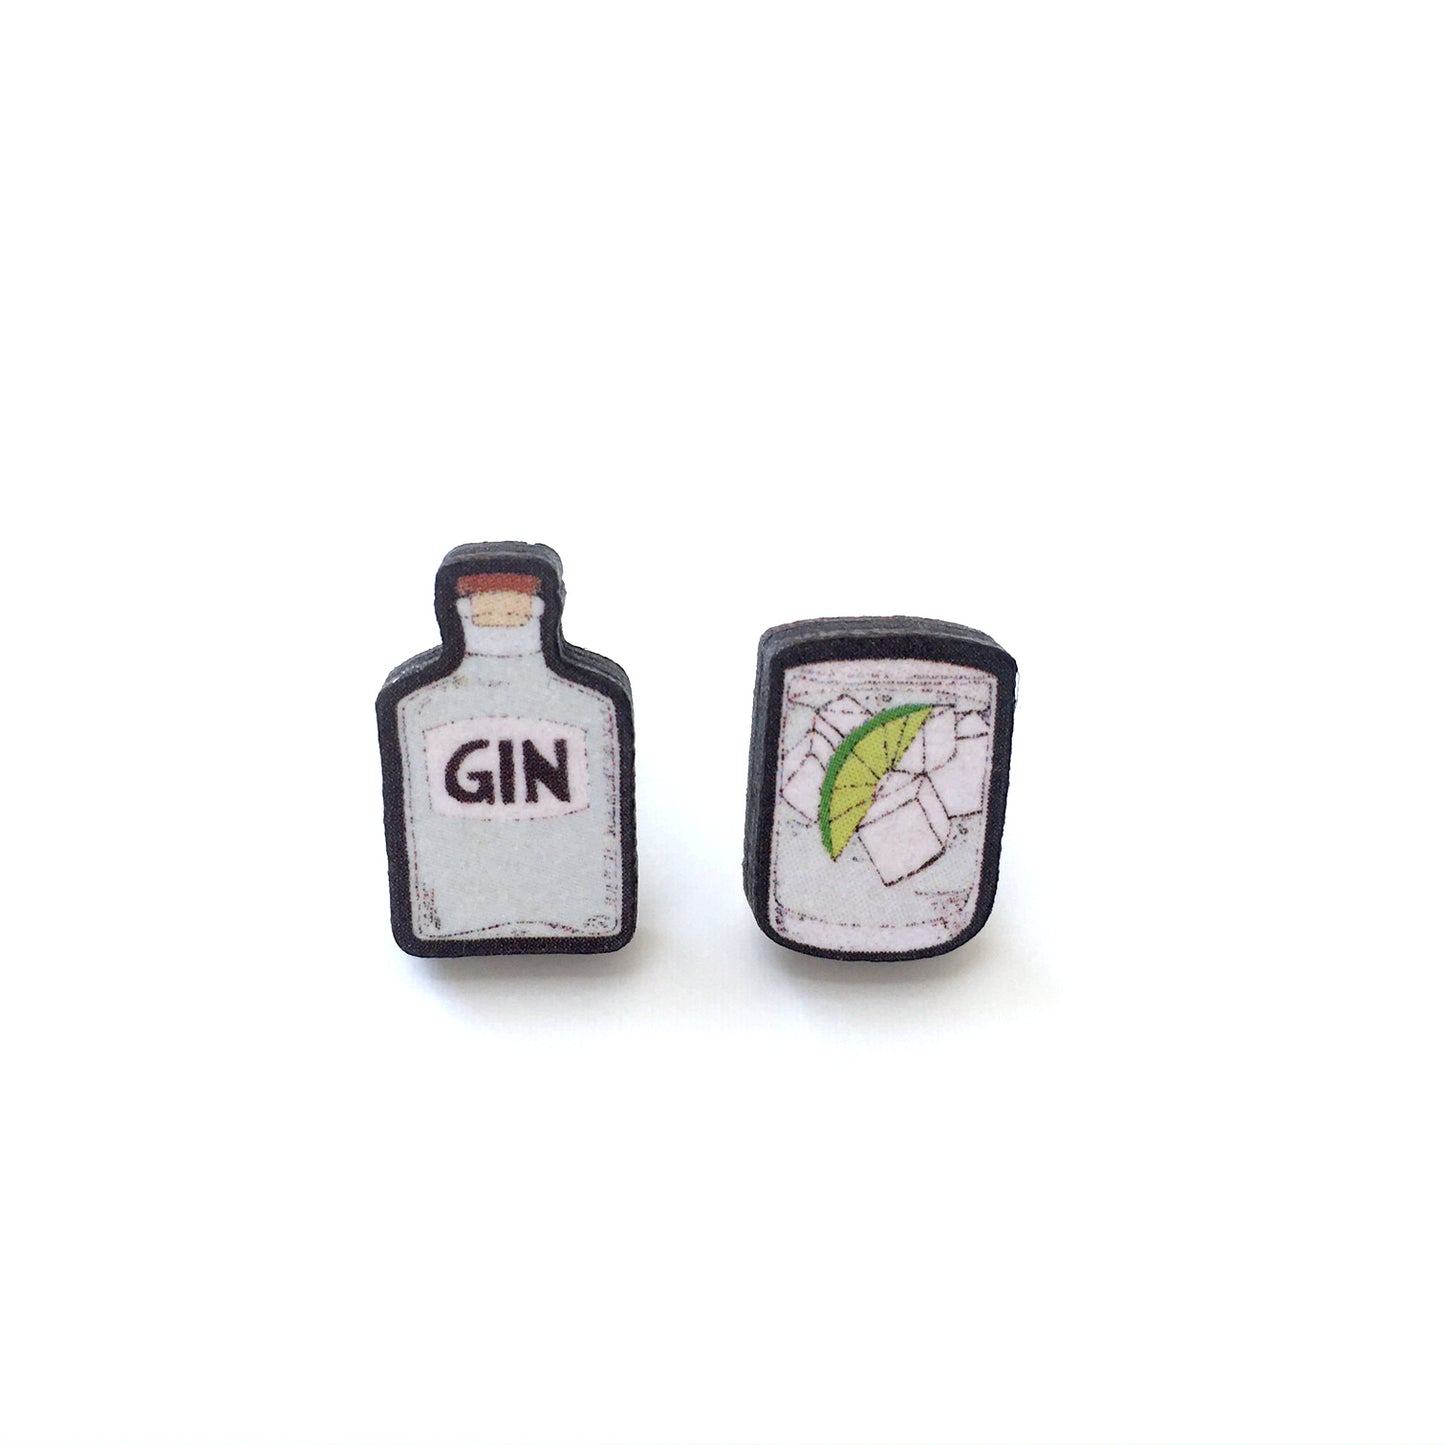 Gin and tonic mismatch stud earrings